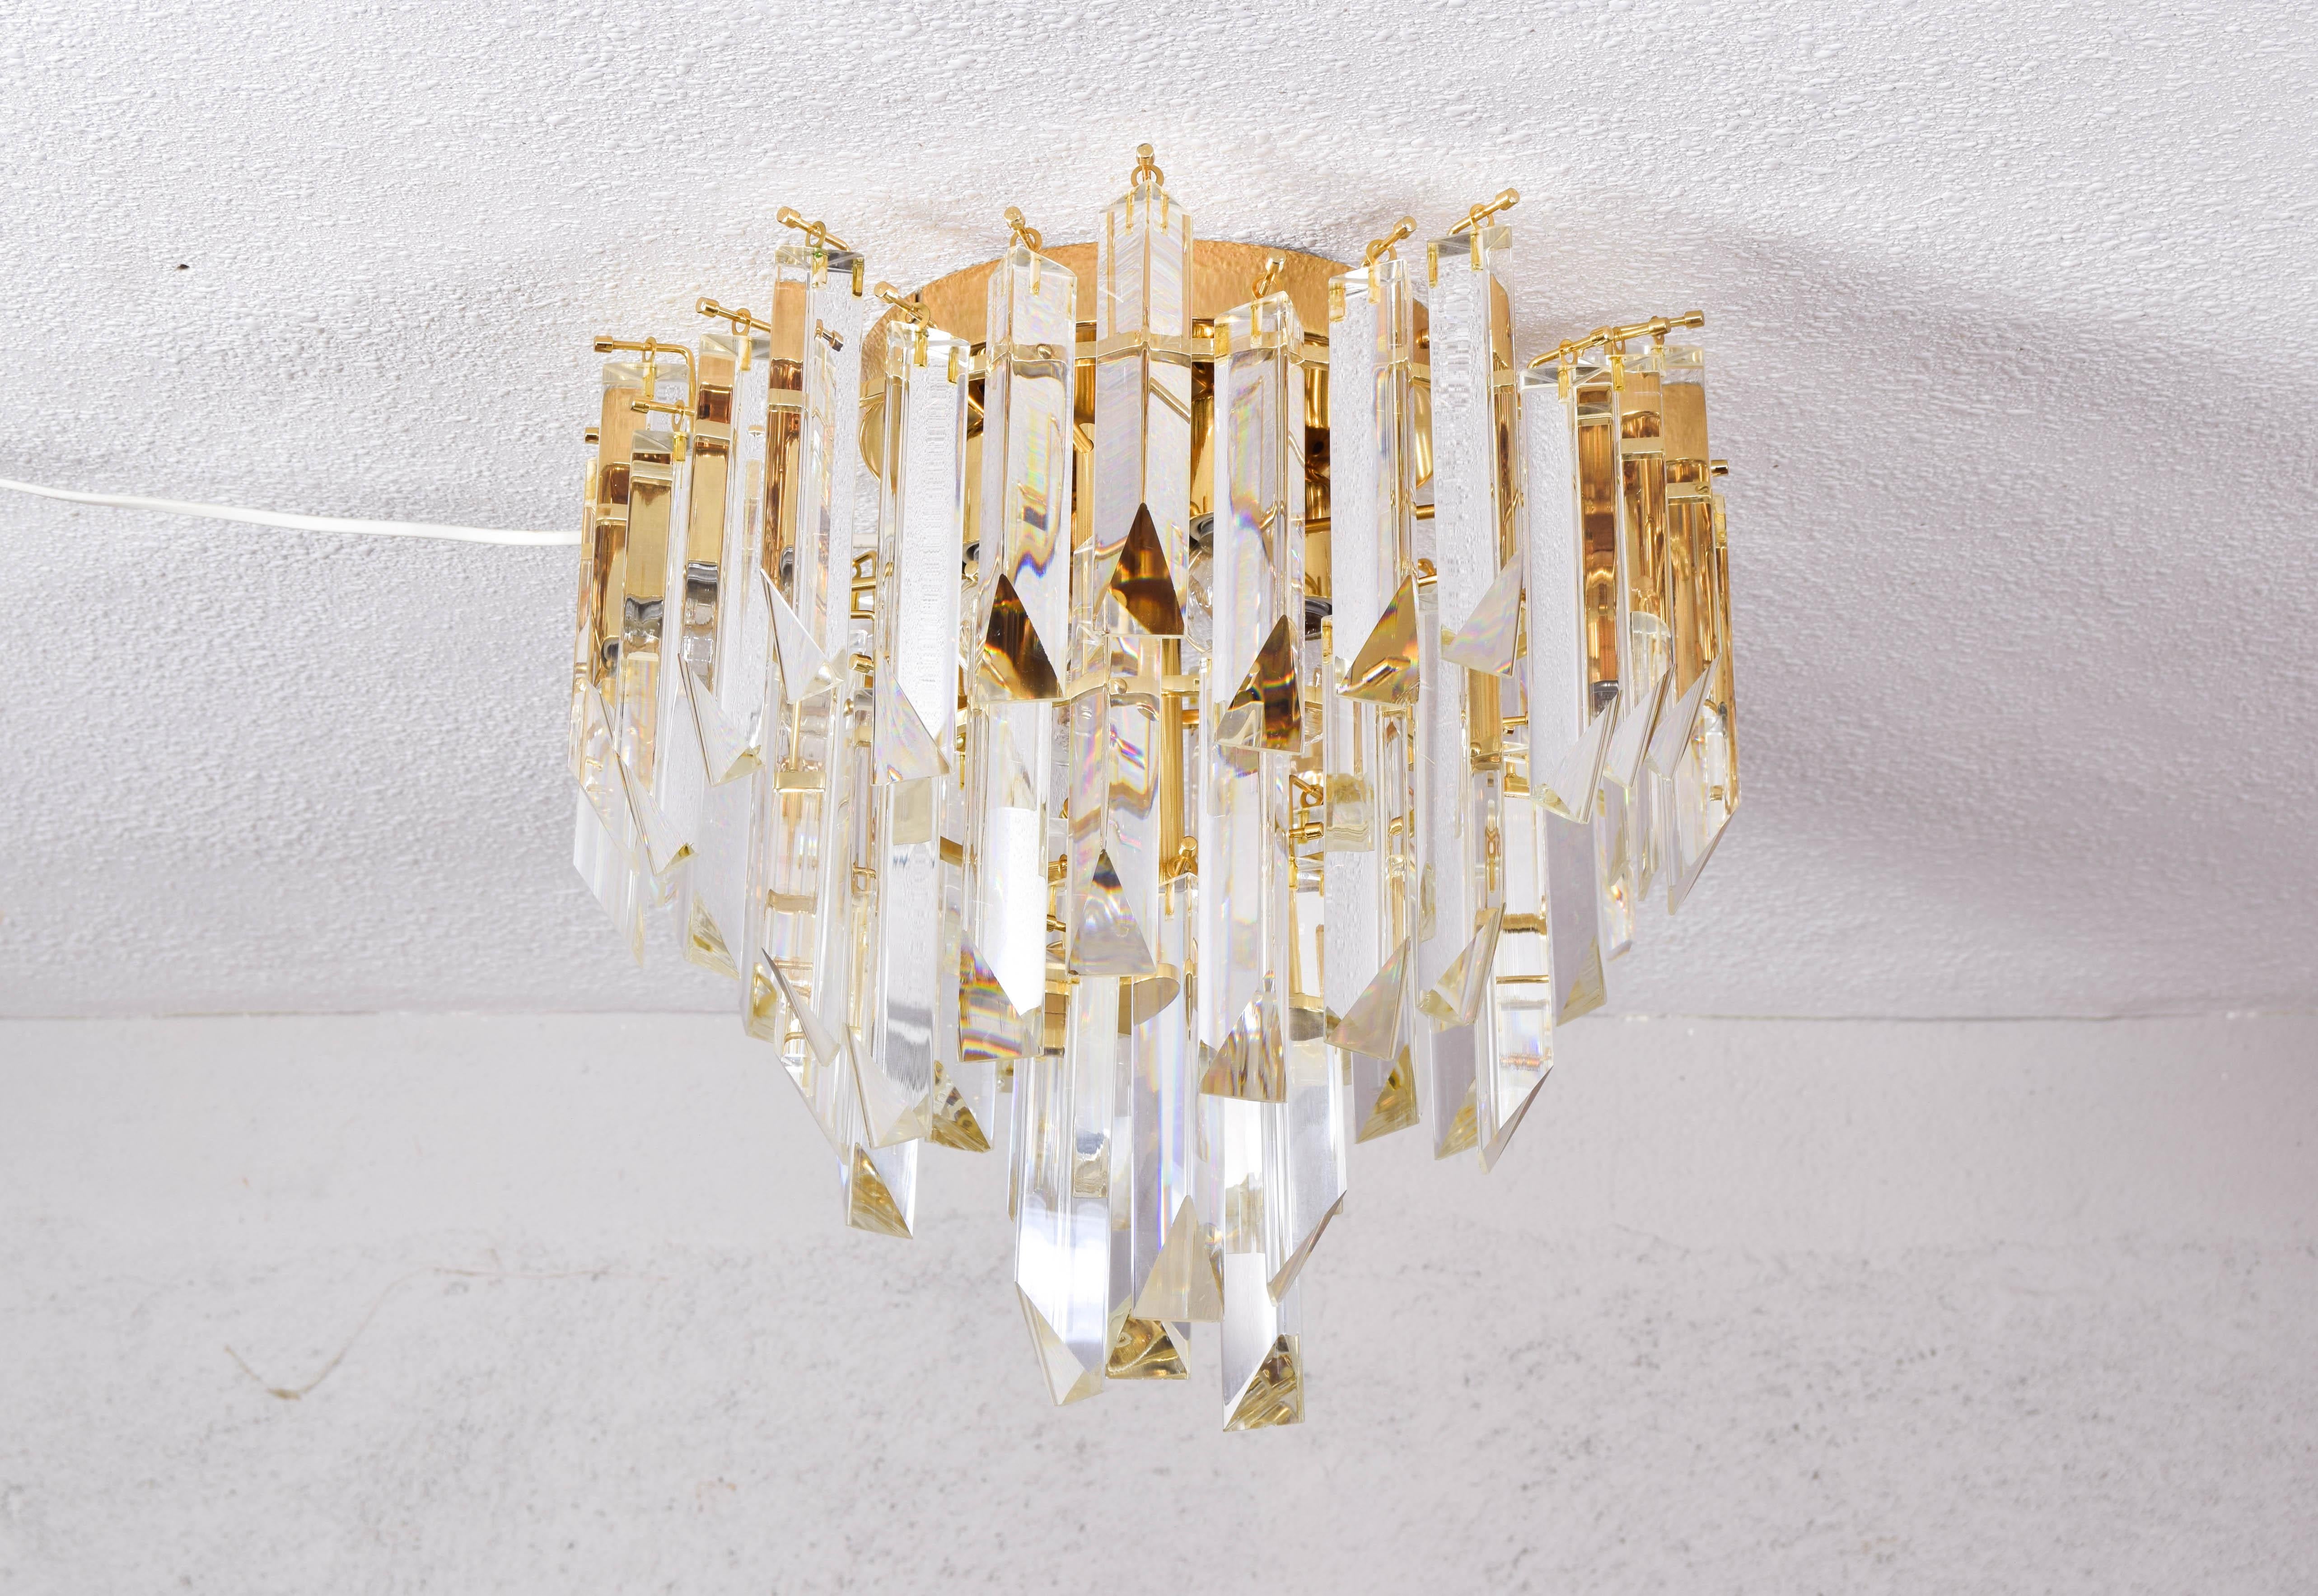 Magnificent Italian ceiling lamp from the Venini brand.
This ceiling lamp consists of a brass-plated steel structure with four heights and four E27 bulbs.
Composed of beautiful Triedri crystals.
As can be seen in the images, this spectacular ceiling